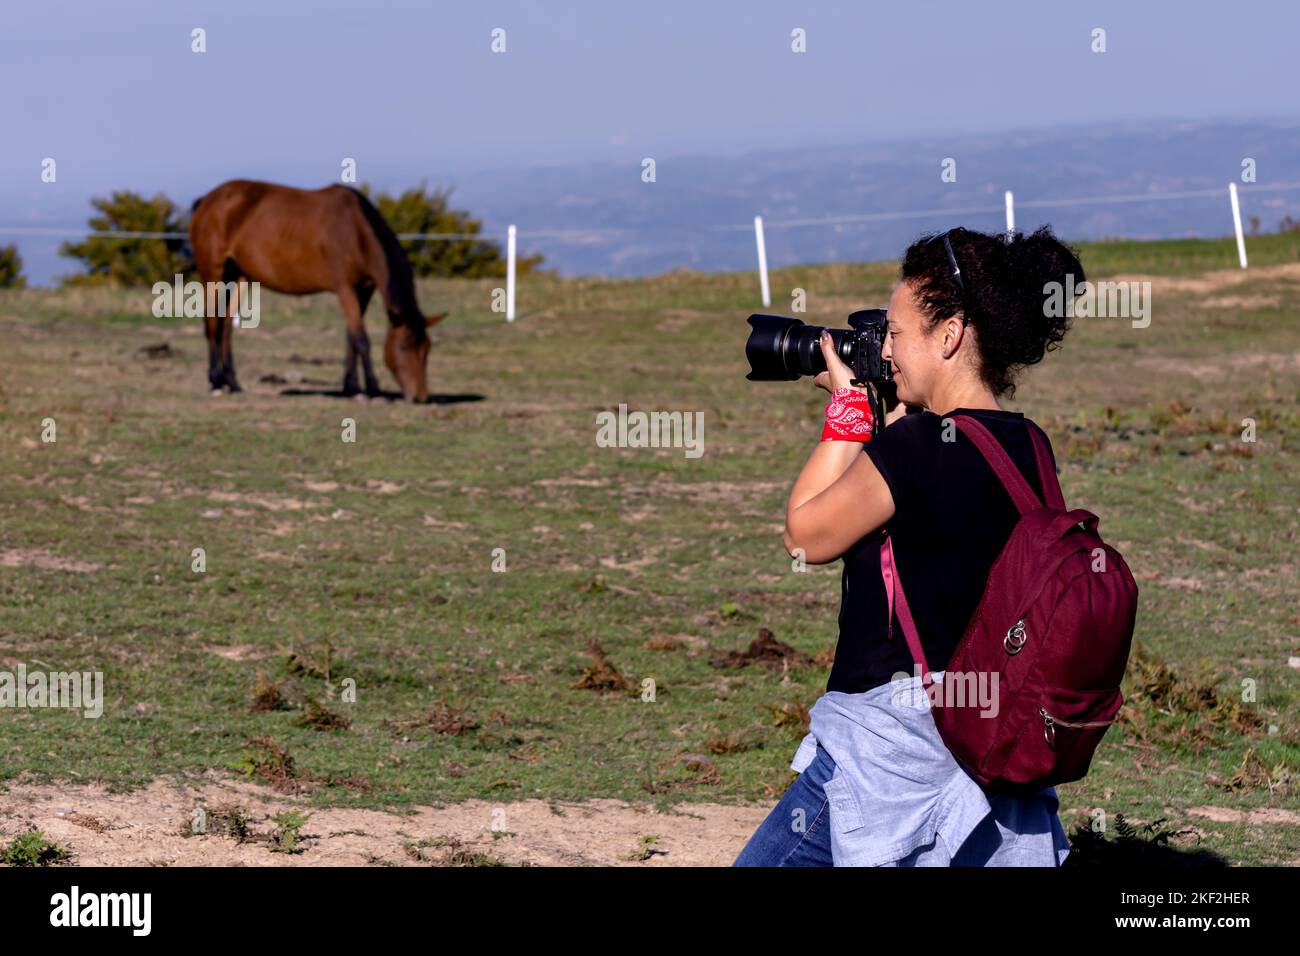 A female photographer with a dslr camera is shooting a horse in Serbia during a sunny day. Travel and hobby concept. Stock Photo